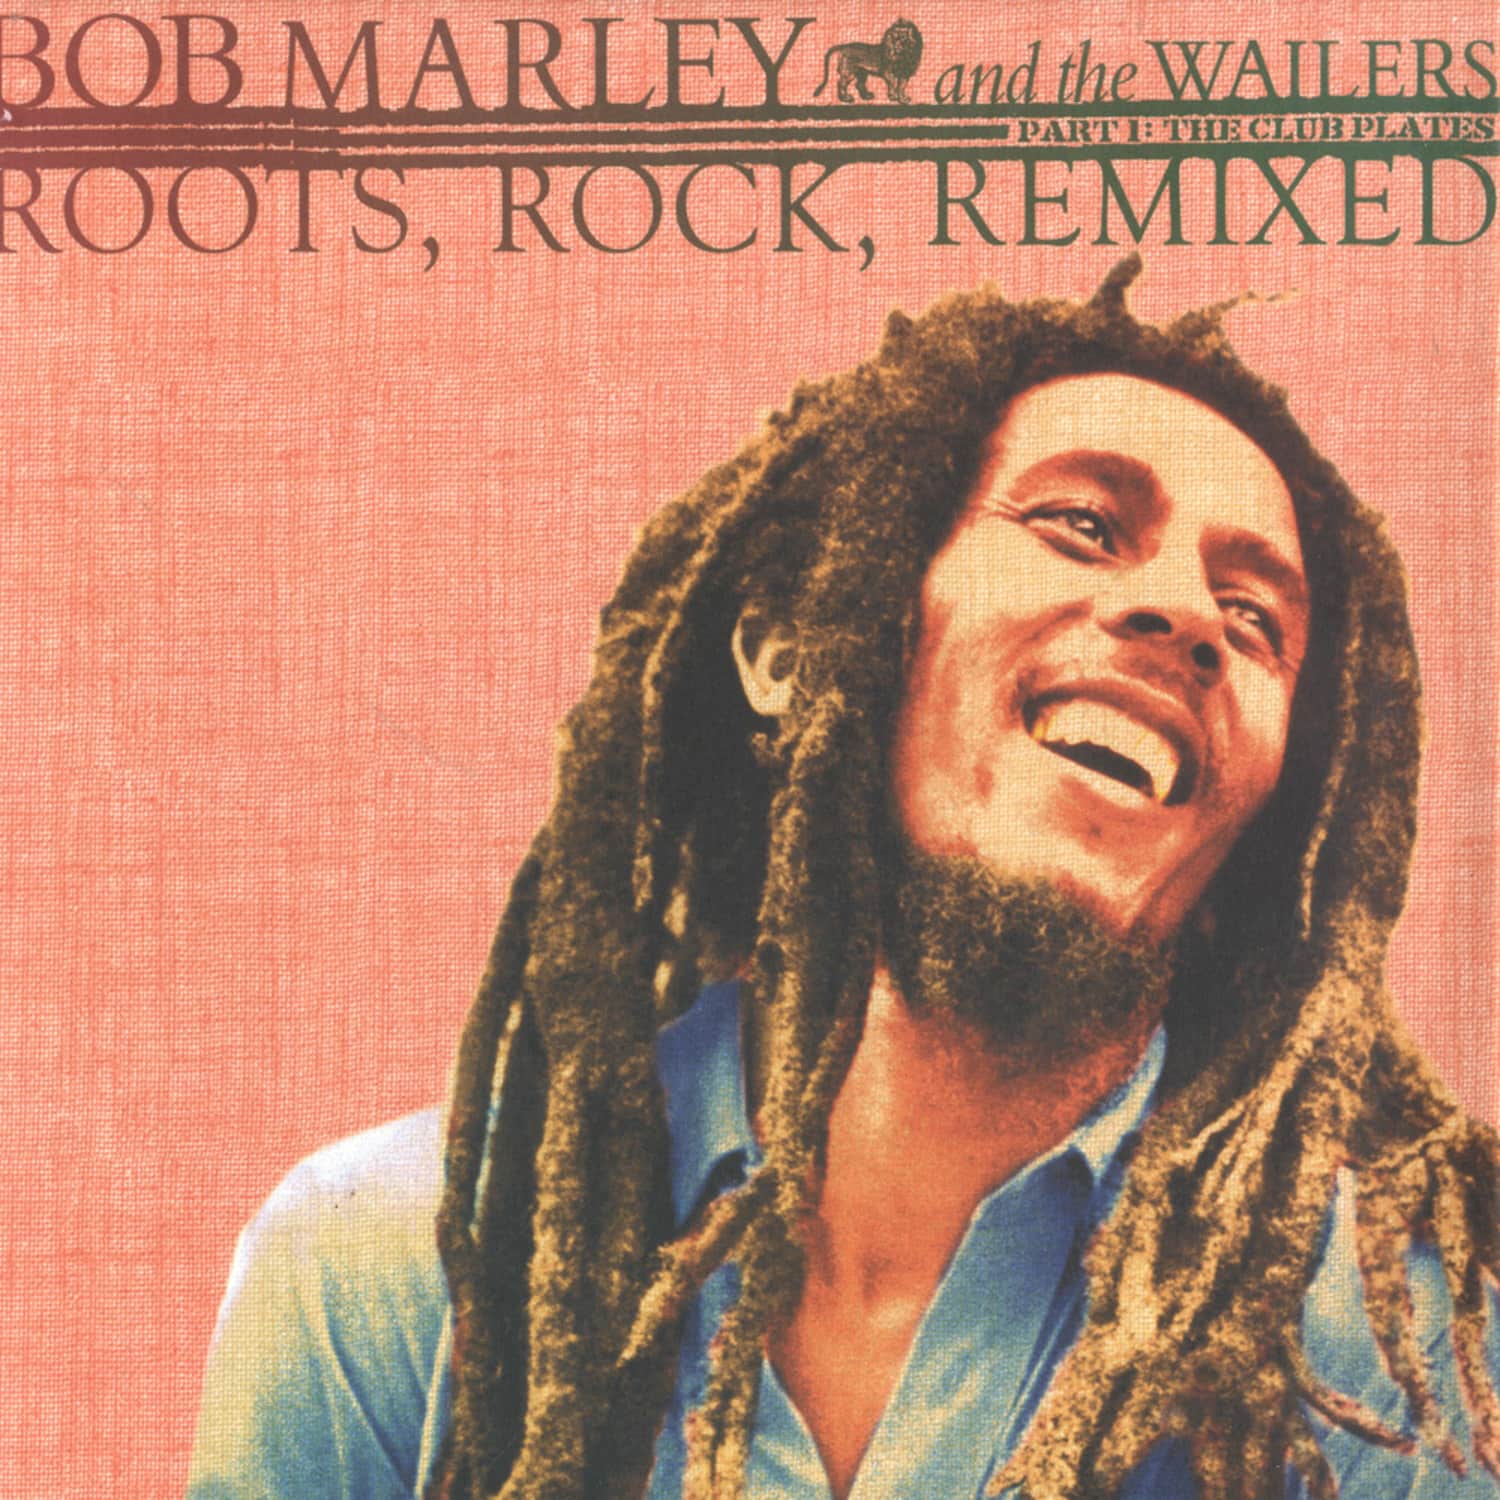 Bob Marley & The Wailers - ROOTS ROCK REMIXED - PART 1 - THE CLUB PLATES